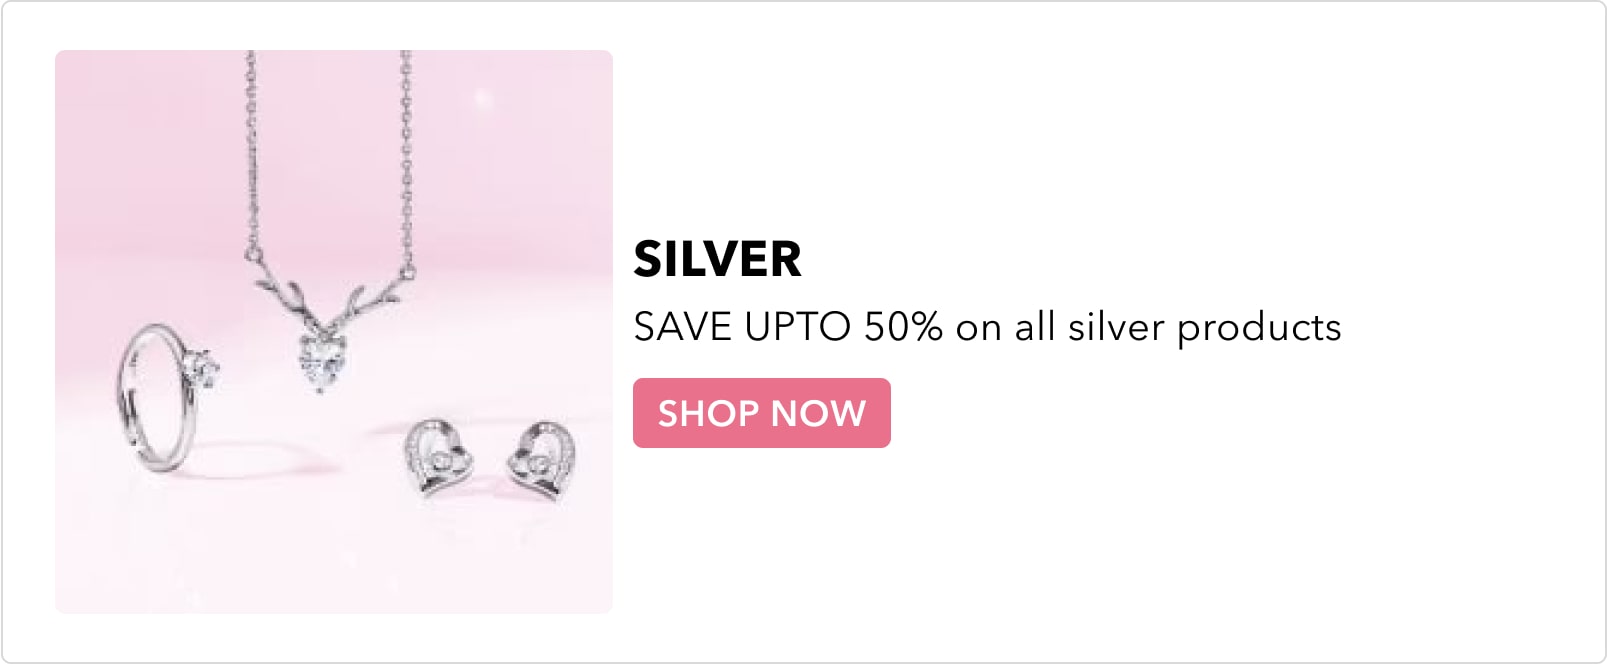 SAVE UP TO 50% on all silver products